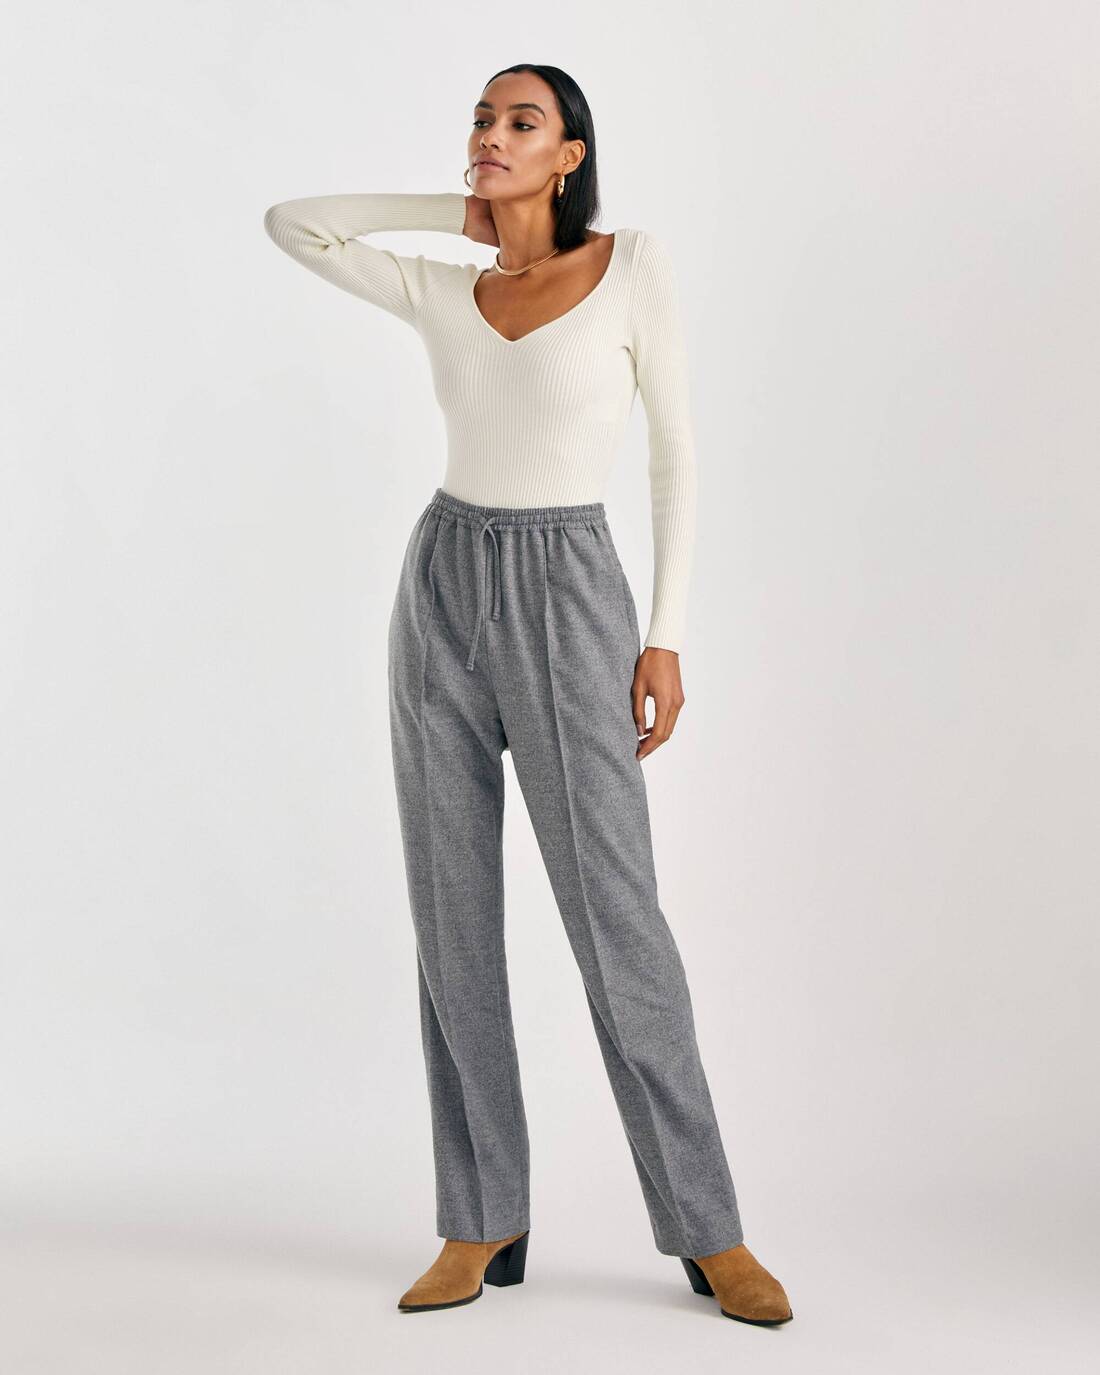 Comfortable wool trousers